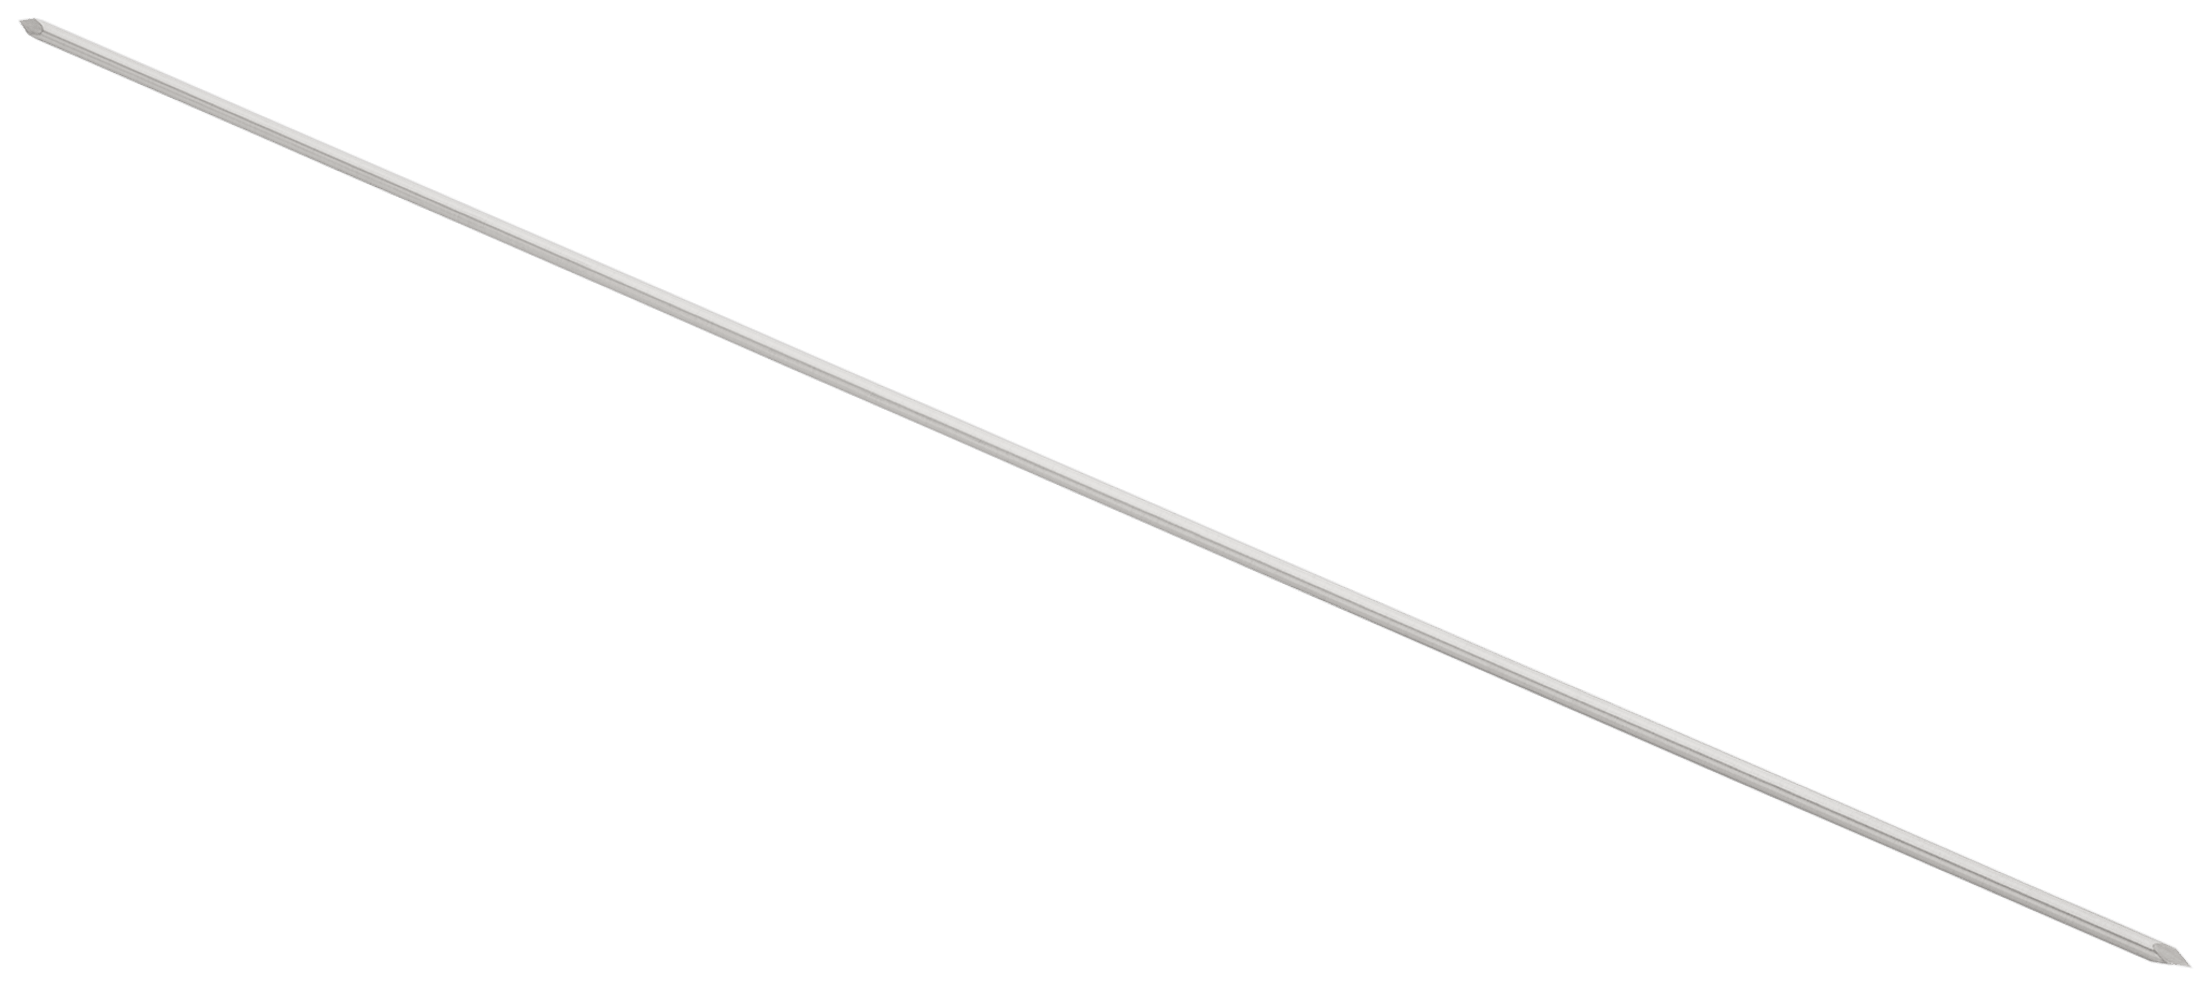 Nitinol Guidewire with Double Trocar Tip, 0.078" x 9.25" (2.0 mm x 235 mm)